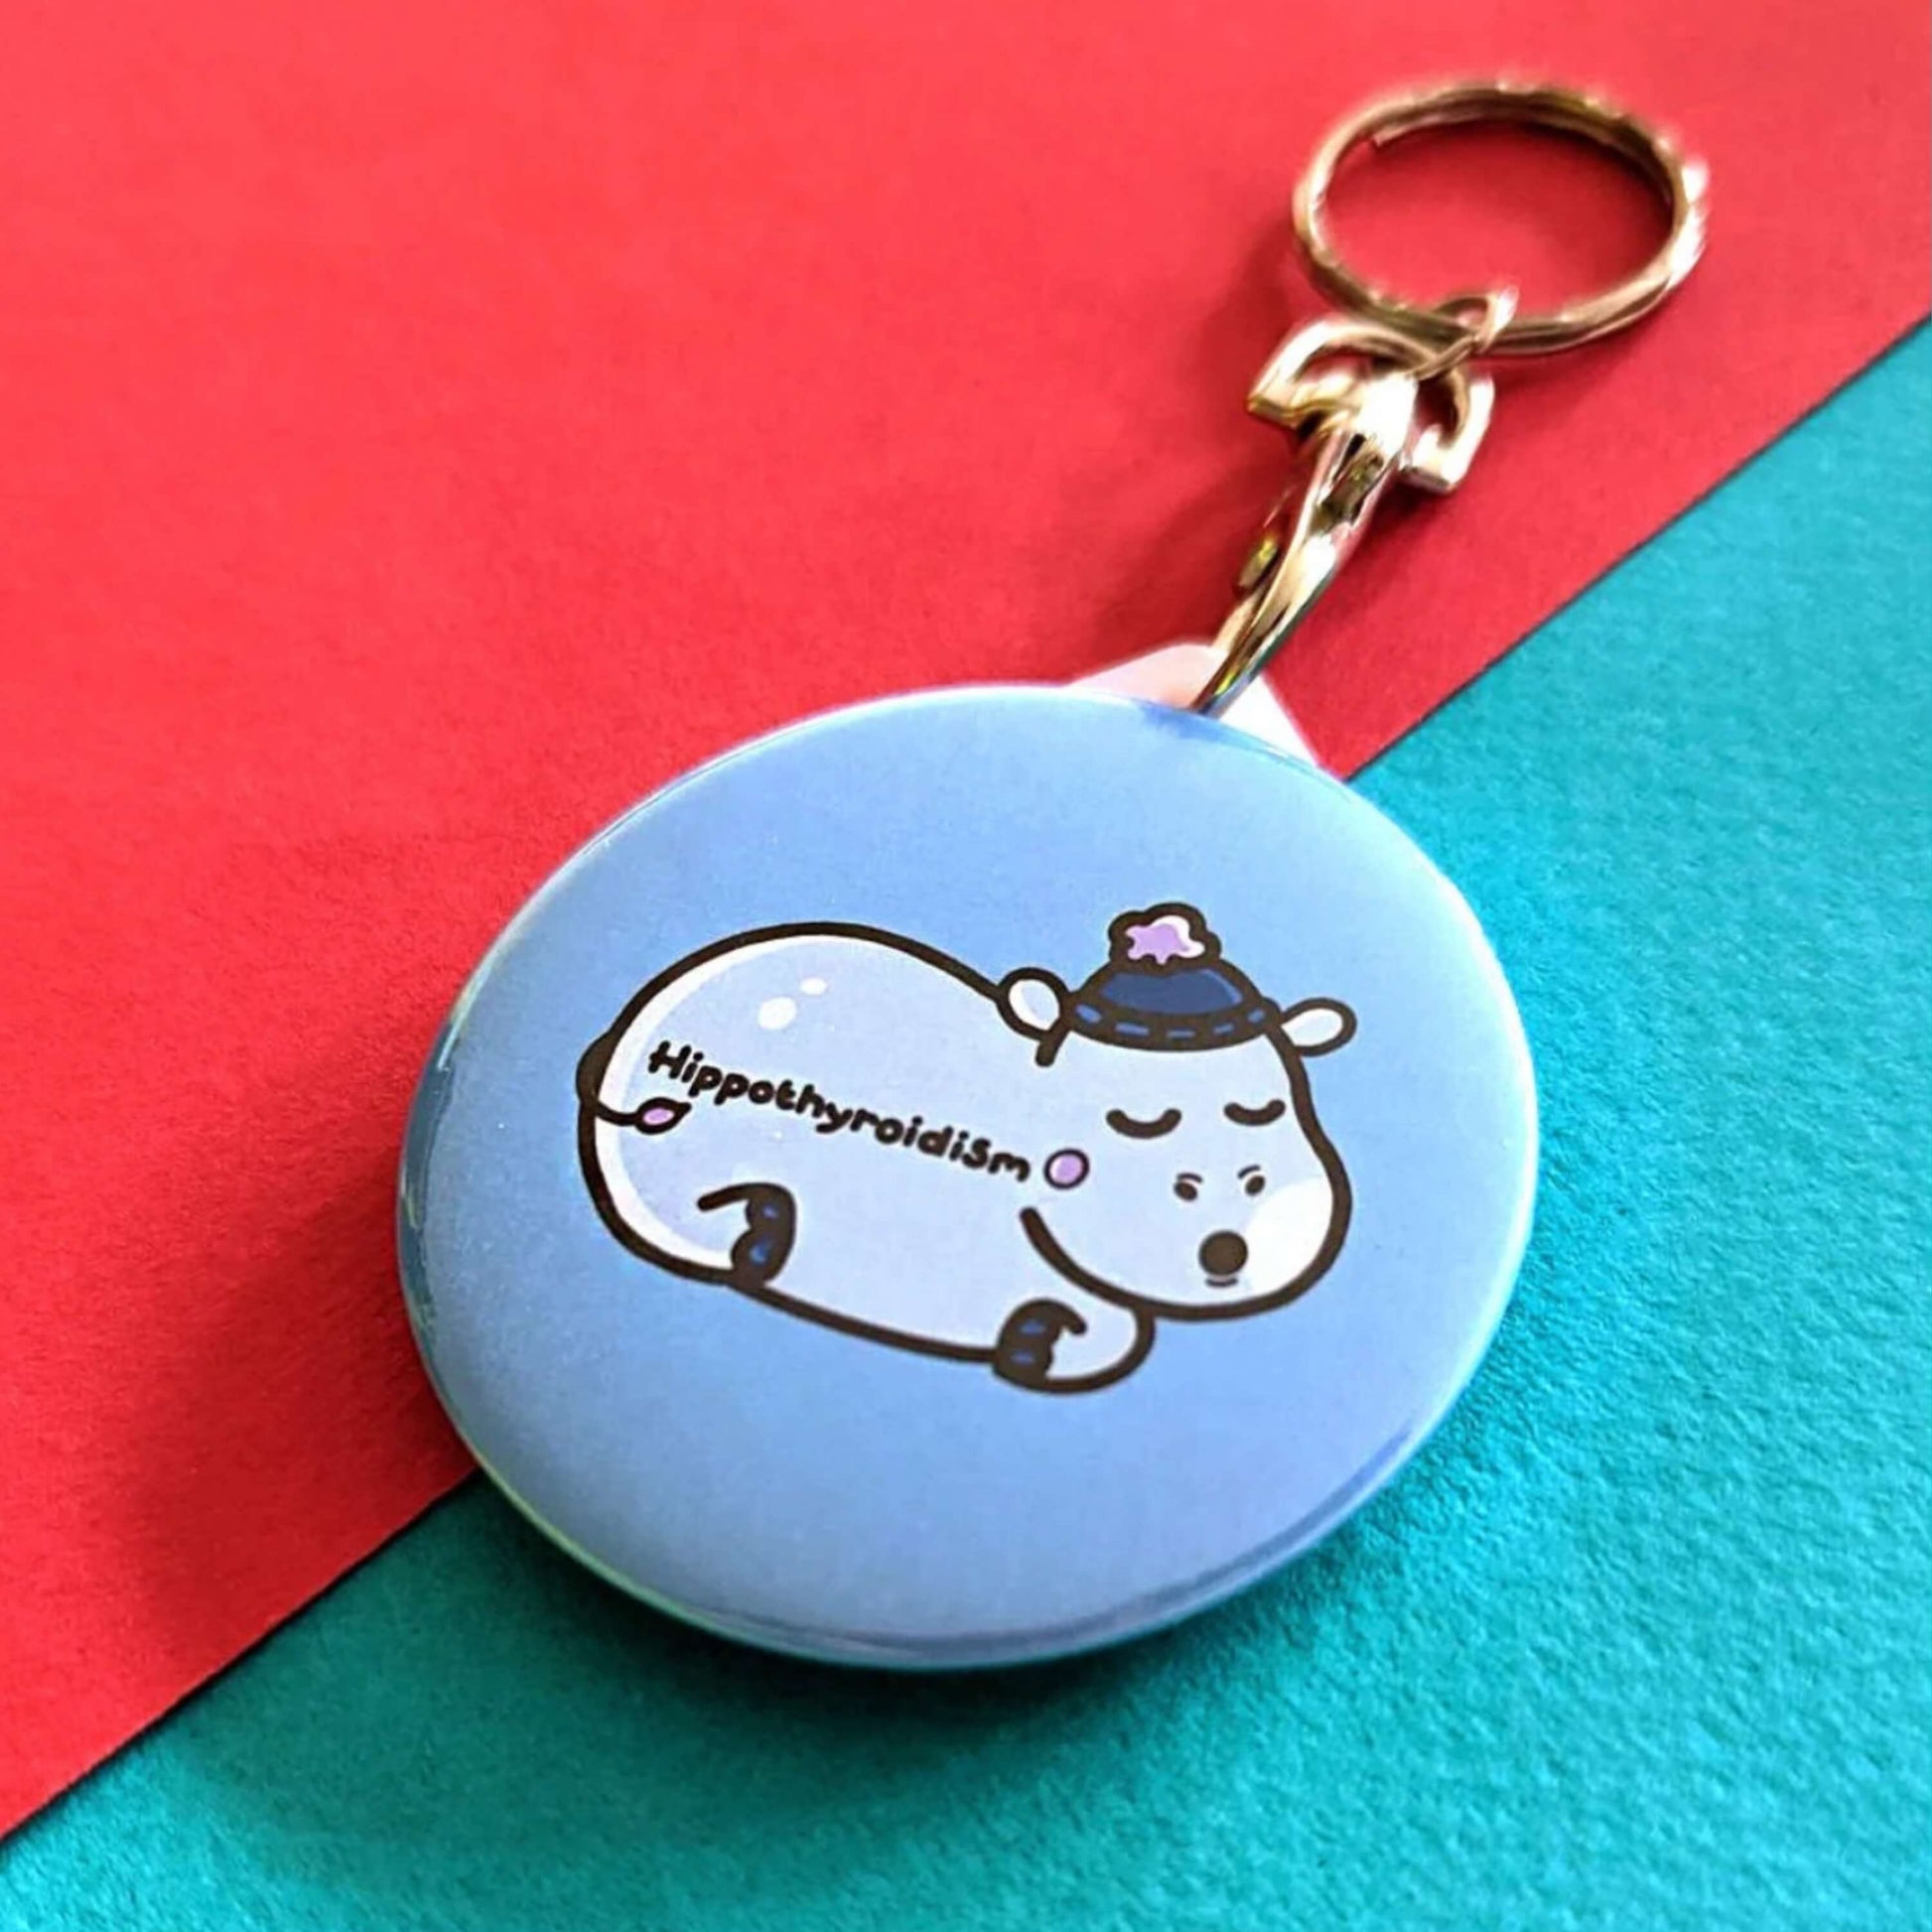 Hippothyroidism Keyring - Hypothyroidism on a red and blue background. The circular blue key ring has an illustration of a sleeping hippo wearing a blue wooly hat with Hippothyroidism written across its body. The hand drawn design is made to raise awareness for Hypothyroidism.